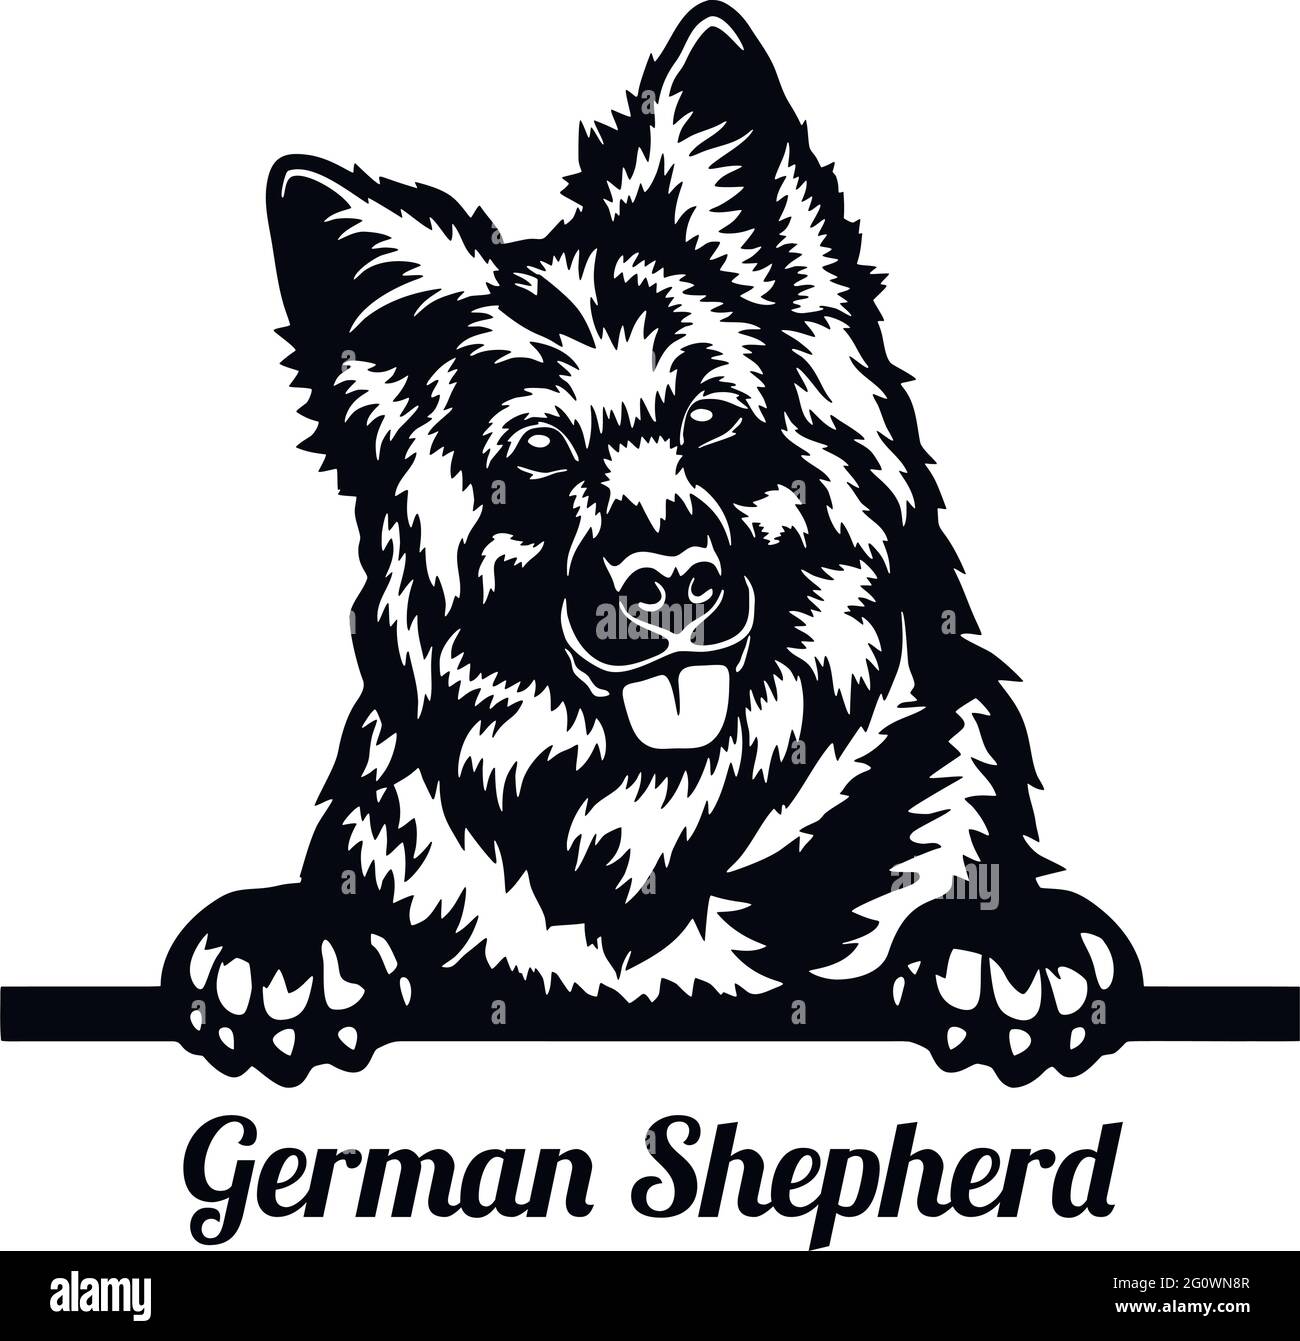 German shepherd dog vector Black and White Stock Photos & Images - Alamy